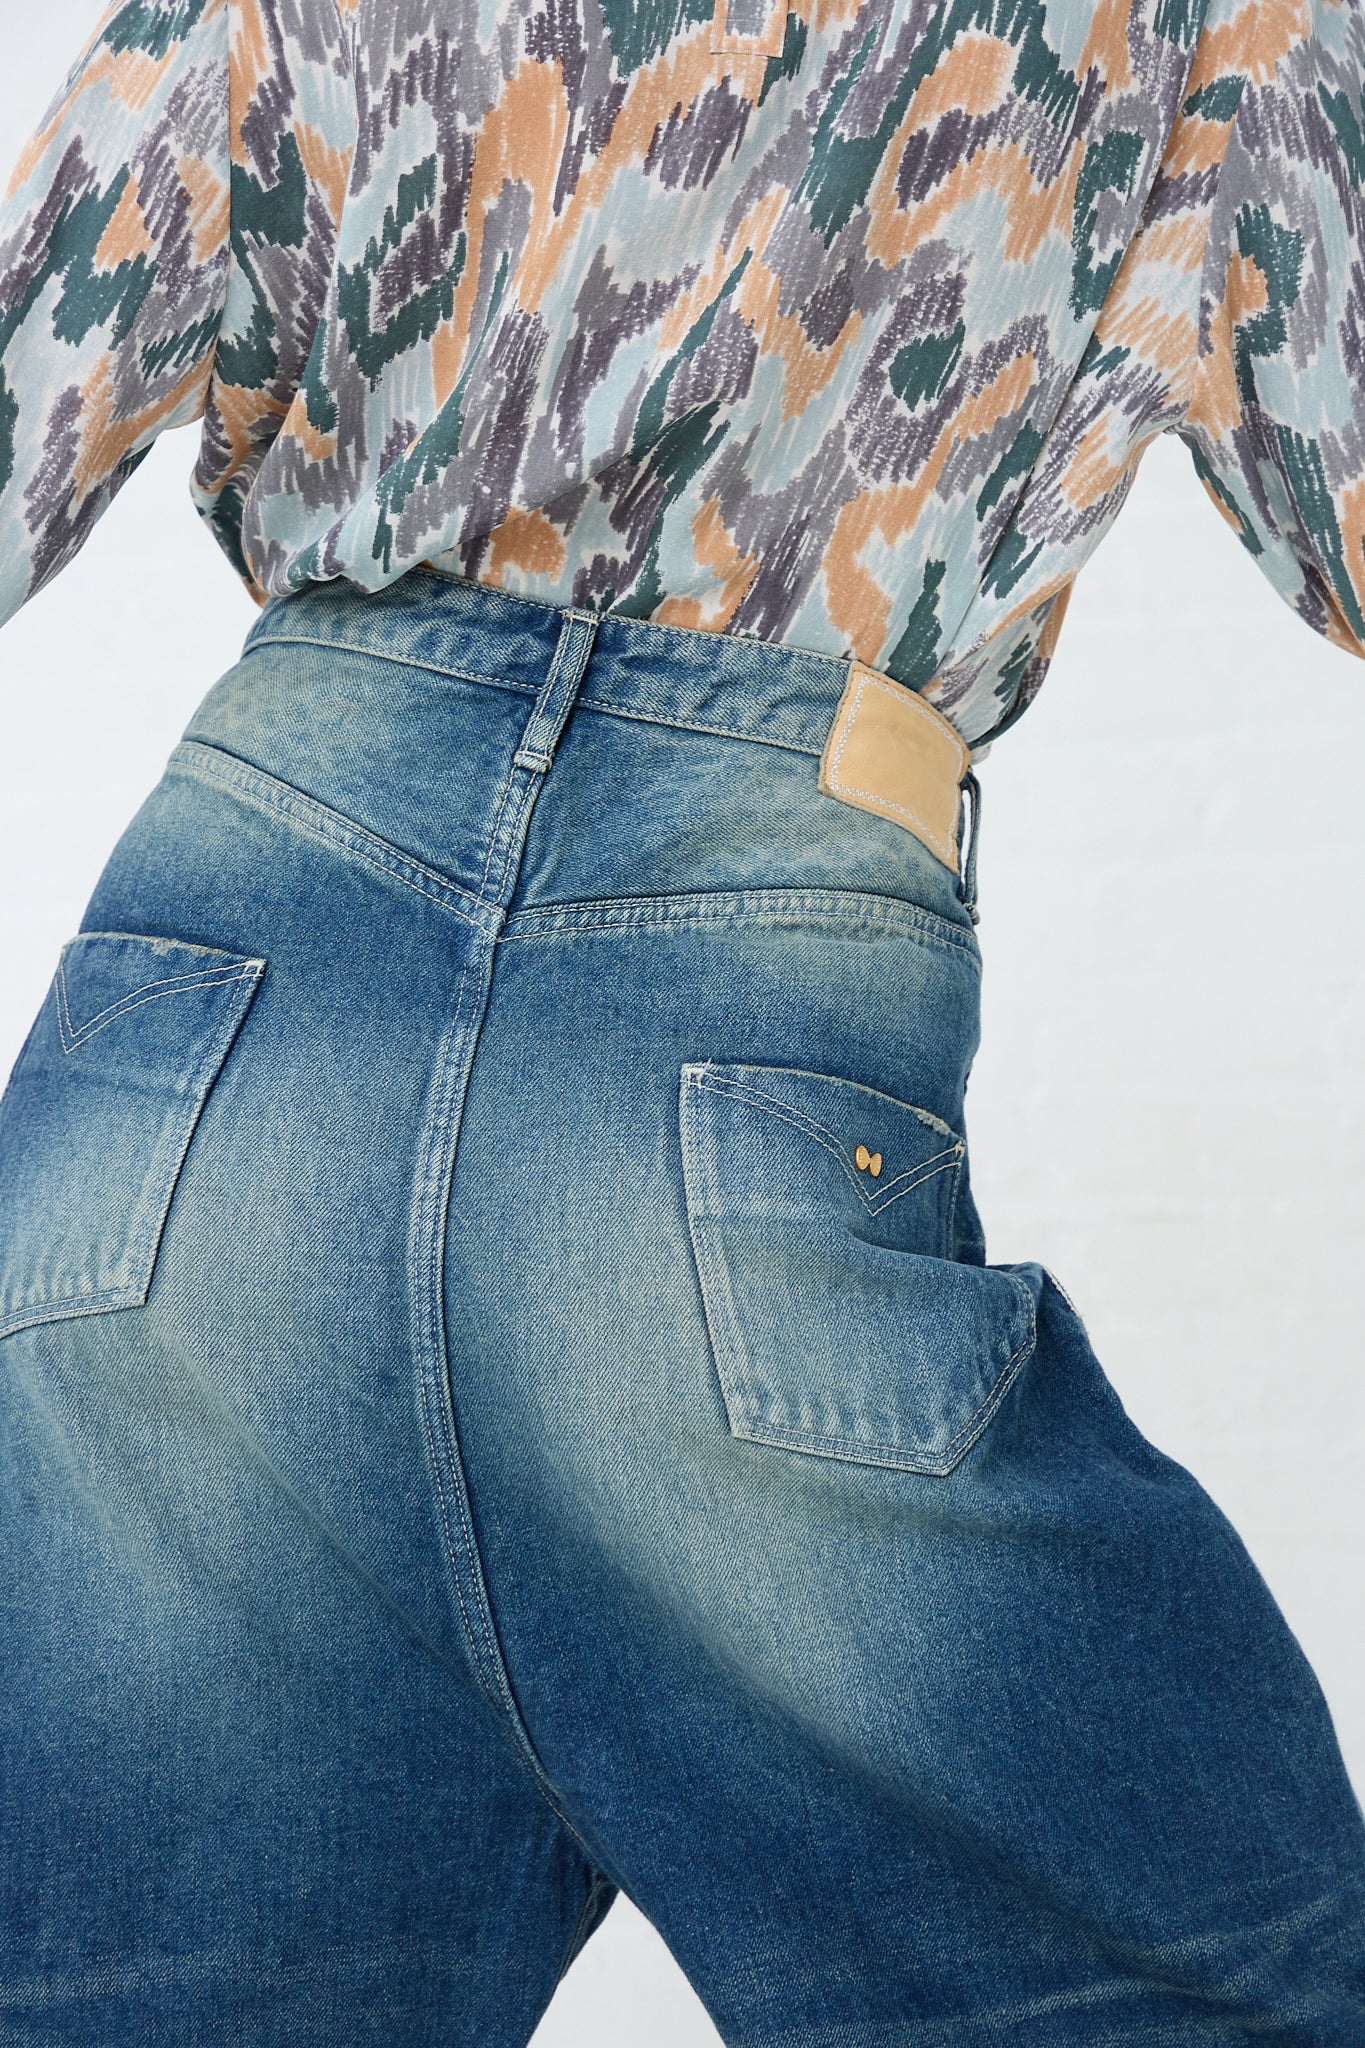 A woman is wearing a pair of Mina Perhonen Always New Tapered Pant in Blue denim shorts. Back view and up close highlighting back pockets and design details.